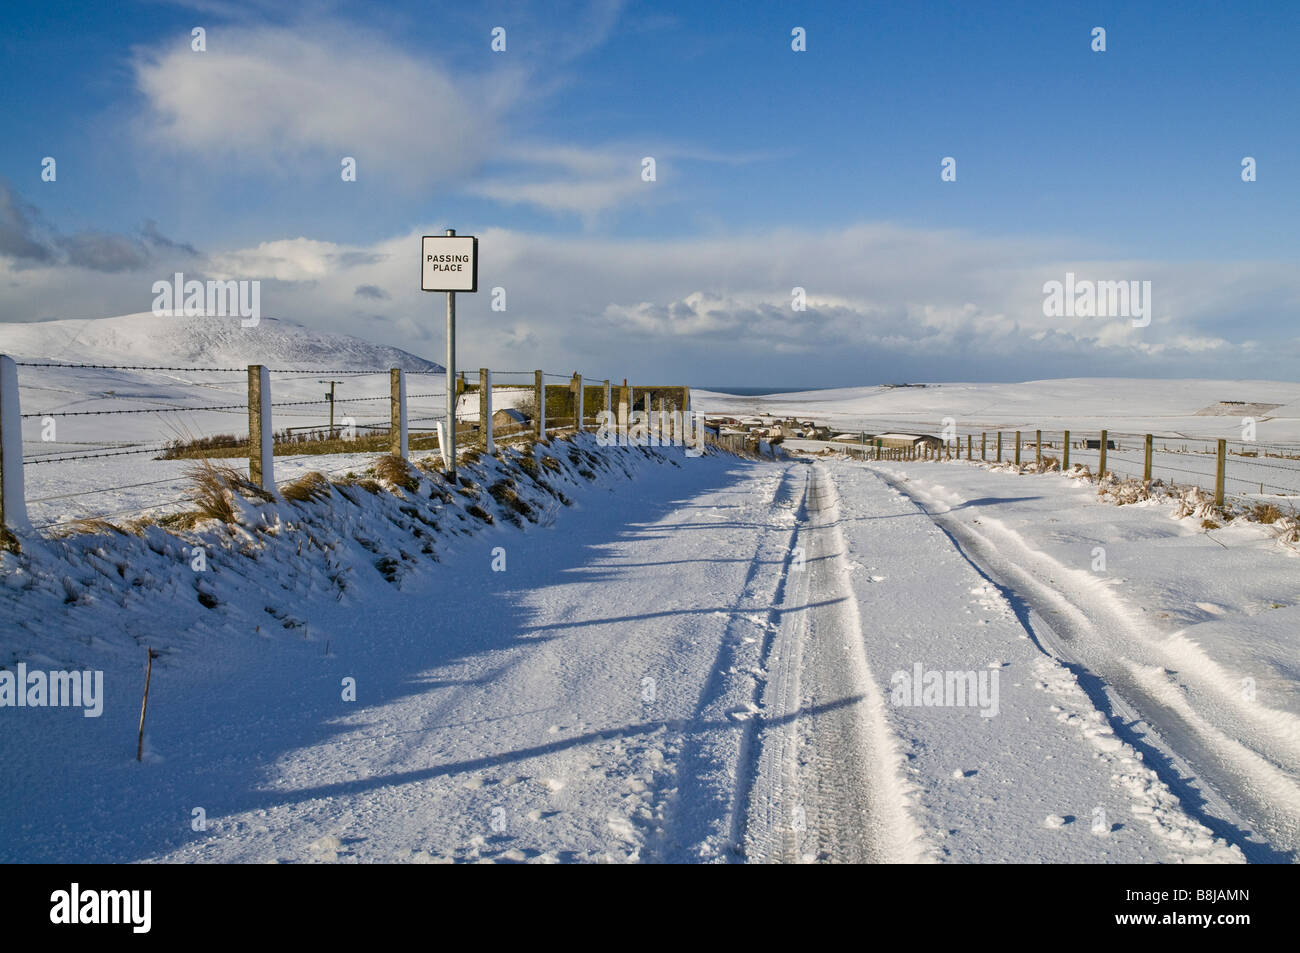 dh  ROADS UK Icy snowy open road snow fields passing place signpost Orkney winter Scotland Stock Photo